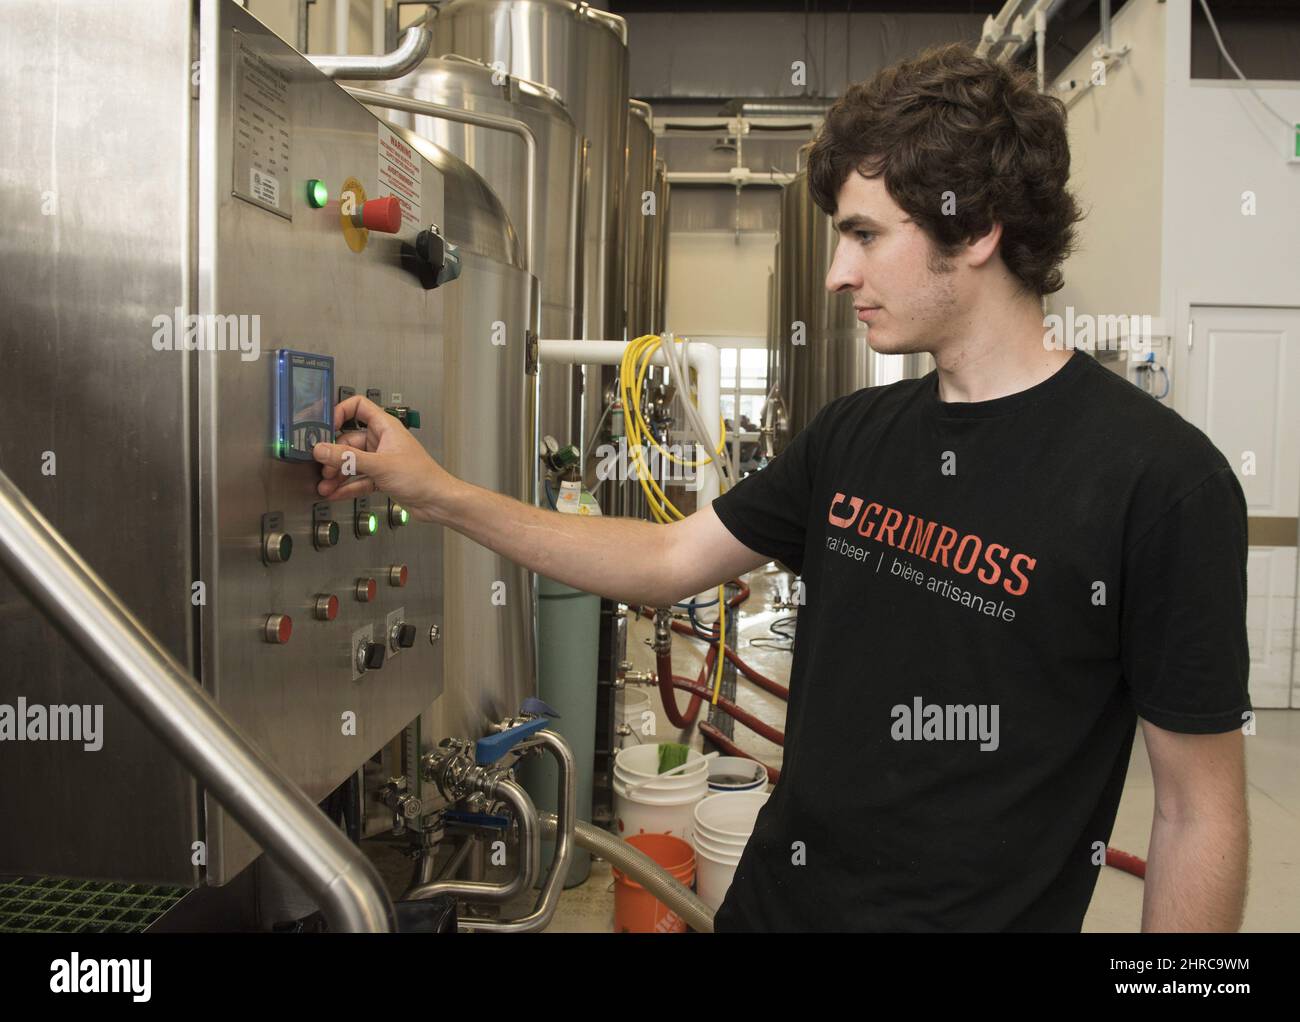 Callum Stewart, brewery operations manager at Grimross Craft Brewing, makes adjustments to their equipment at their business in Fredericton, N.B., on Friday, June 16, 2017. The craft brewing industry is booming in Fredericton and officials in New Brunswick's capital are hoping tourists will want to taste what the city has on tap. THE CANADIAN PRESS/Stephen MacGillivray Stock Photo